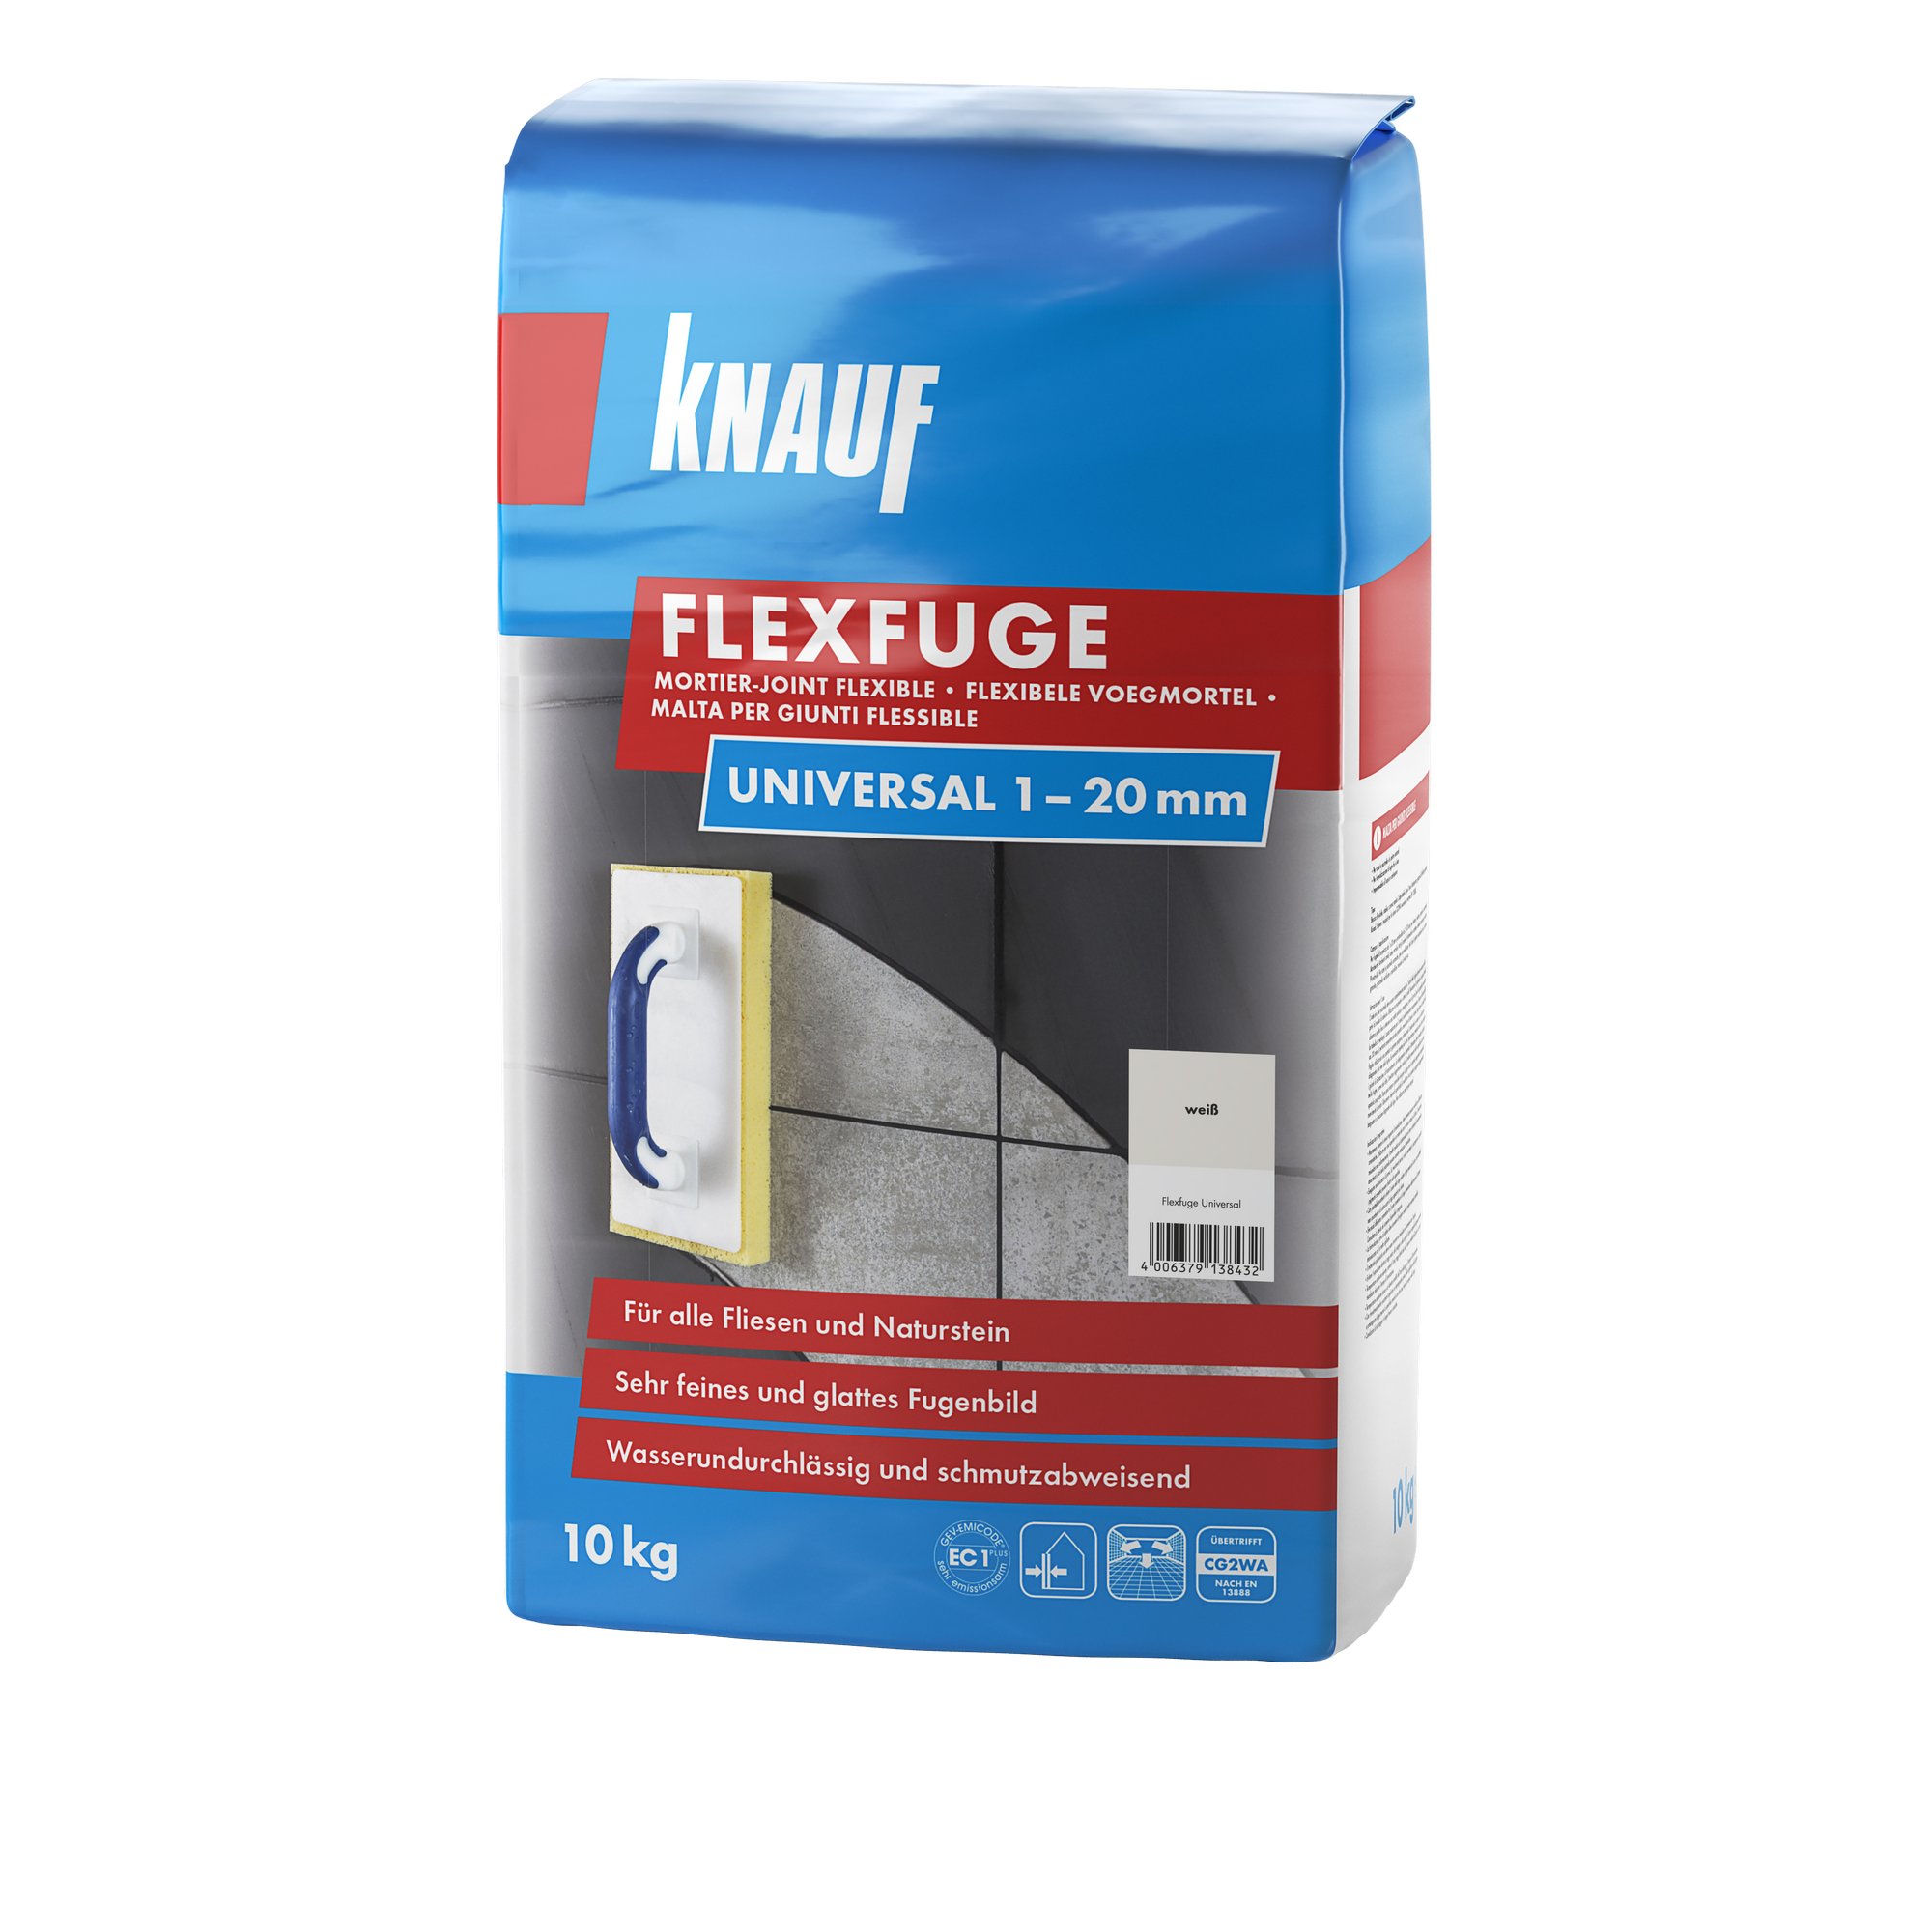 Flexfuge 'Universal' weiß 10 kg + product picture